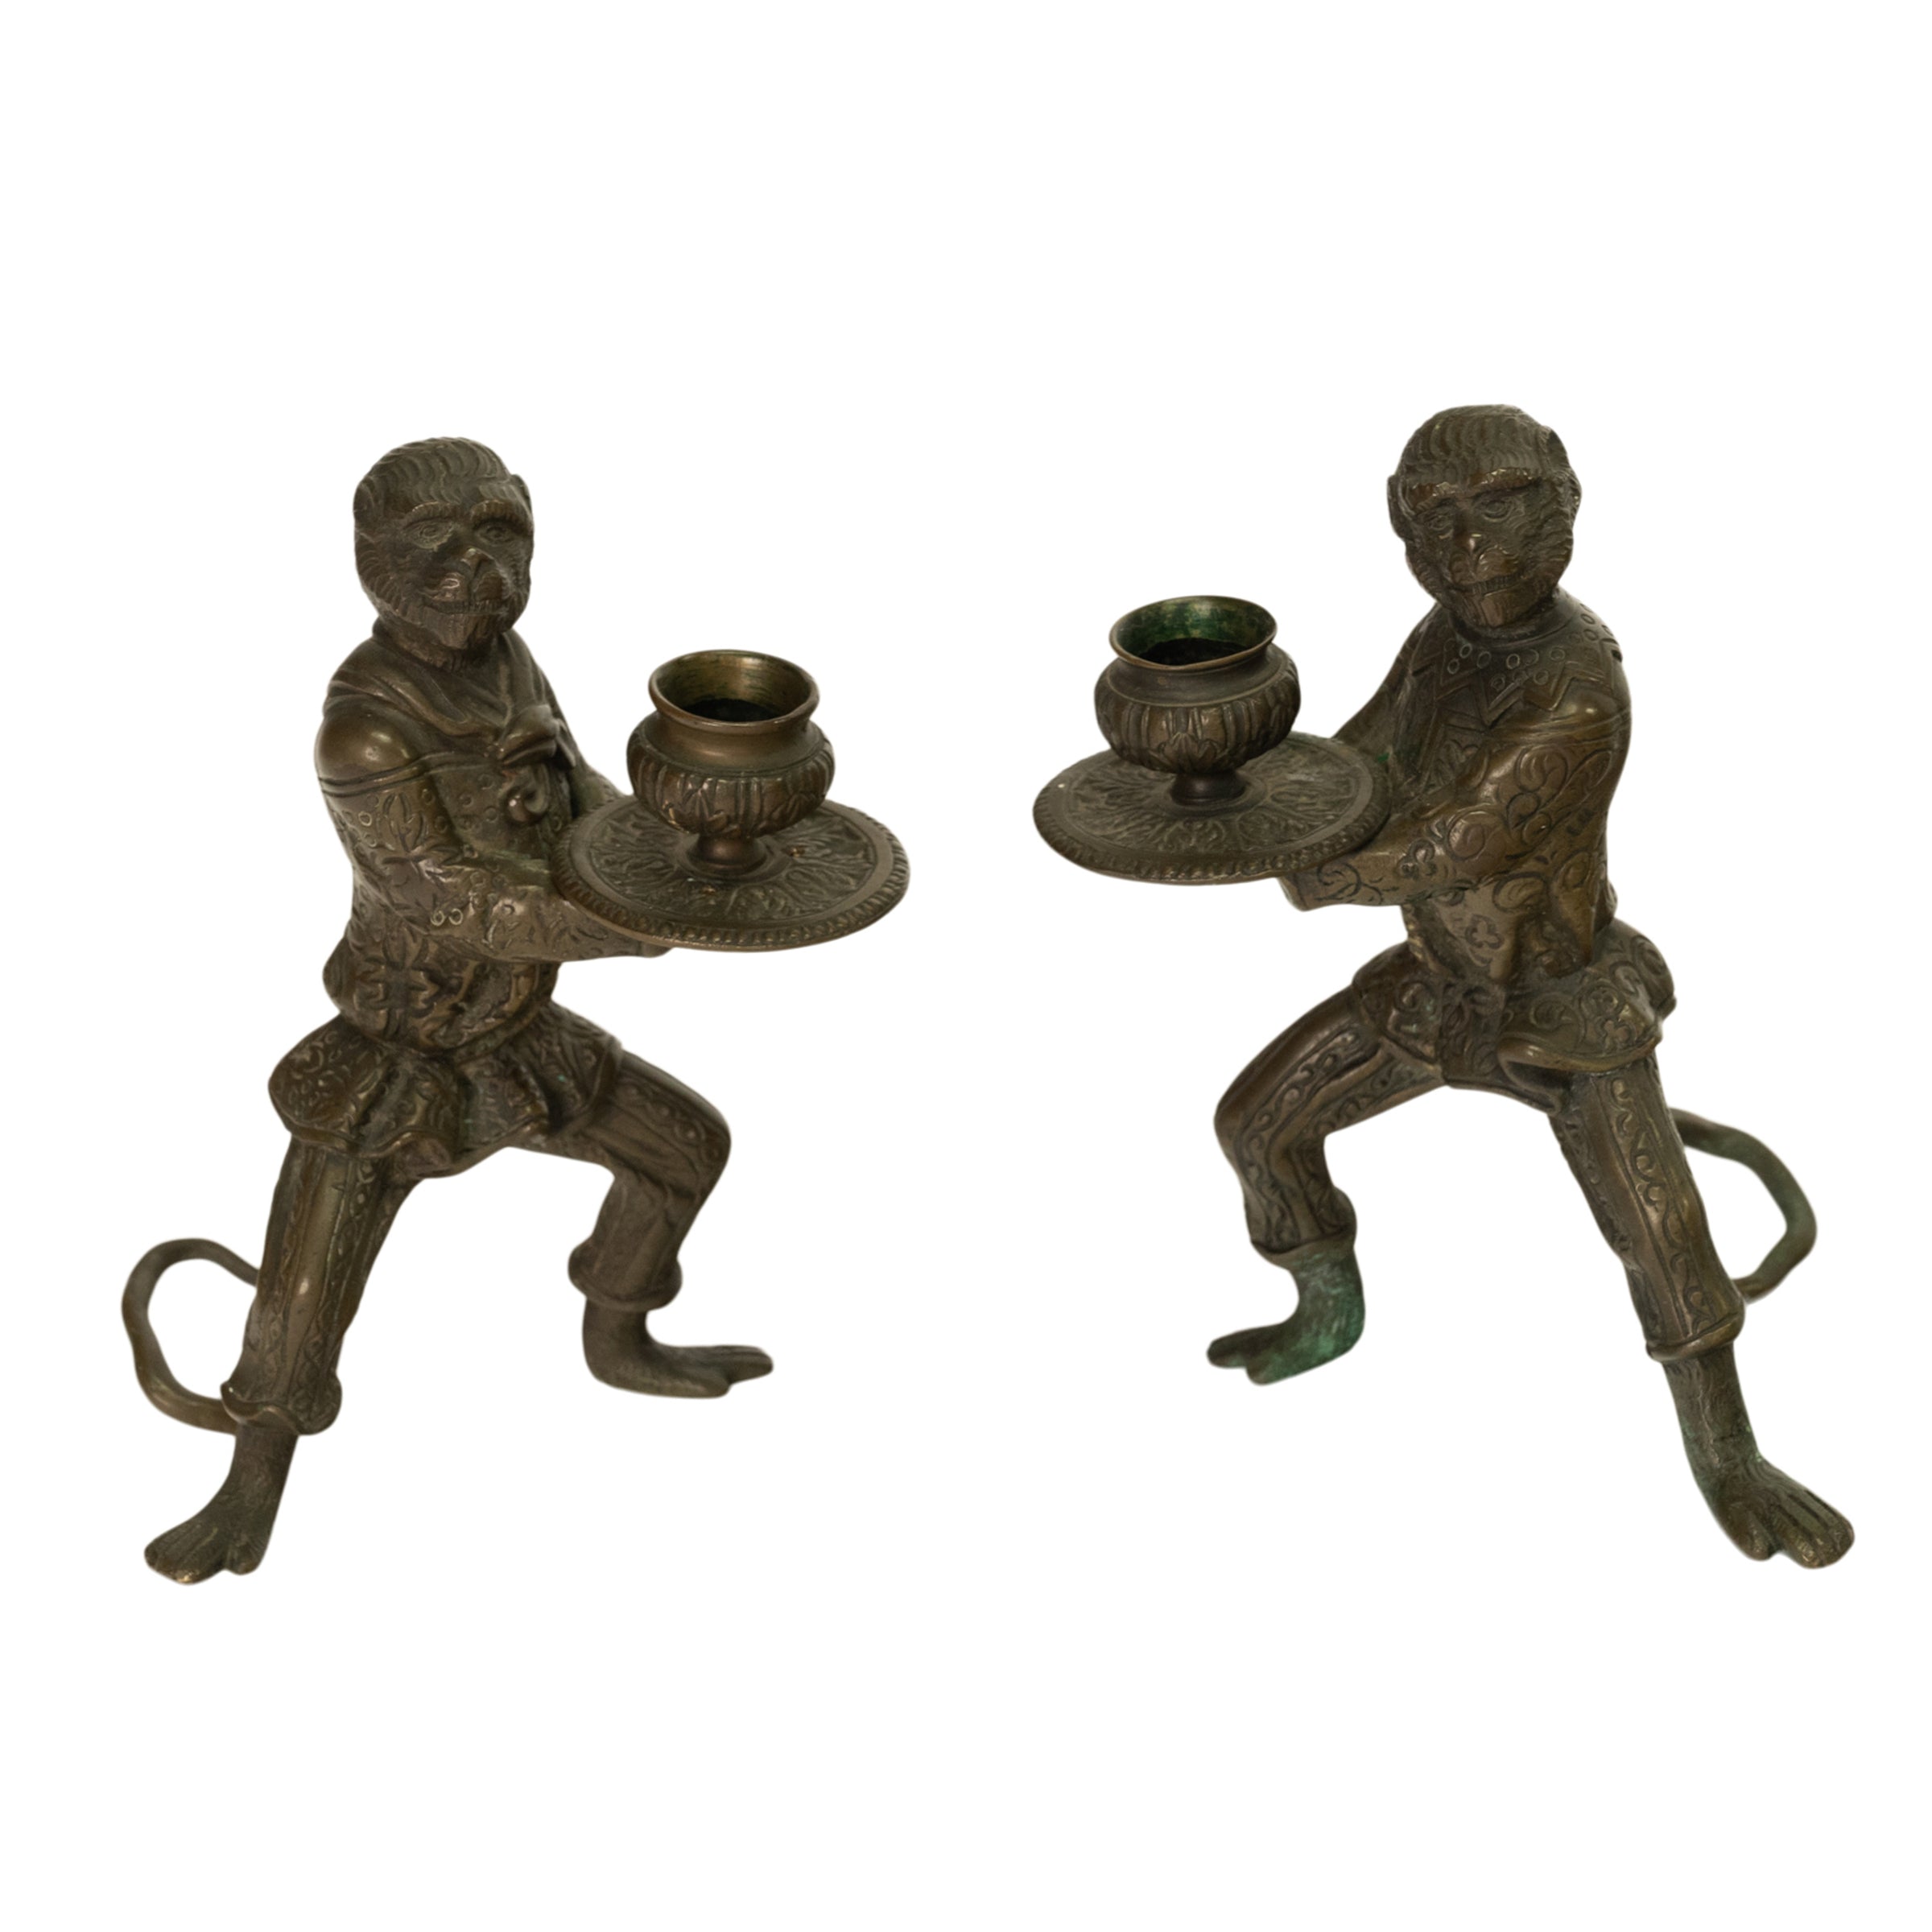 A Small Brass Candlestick with Monkey Mount by Kinco, England, 9cm